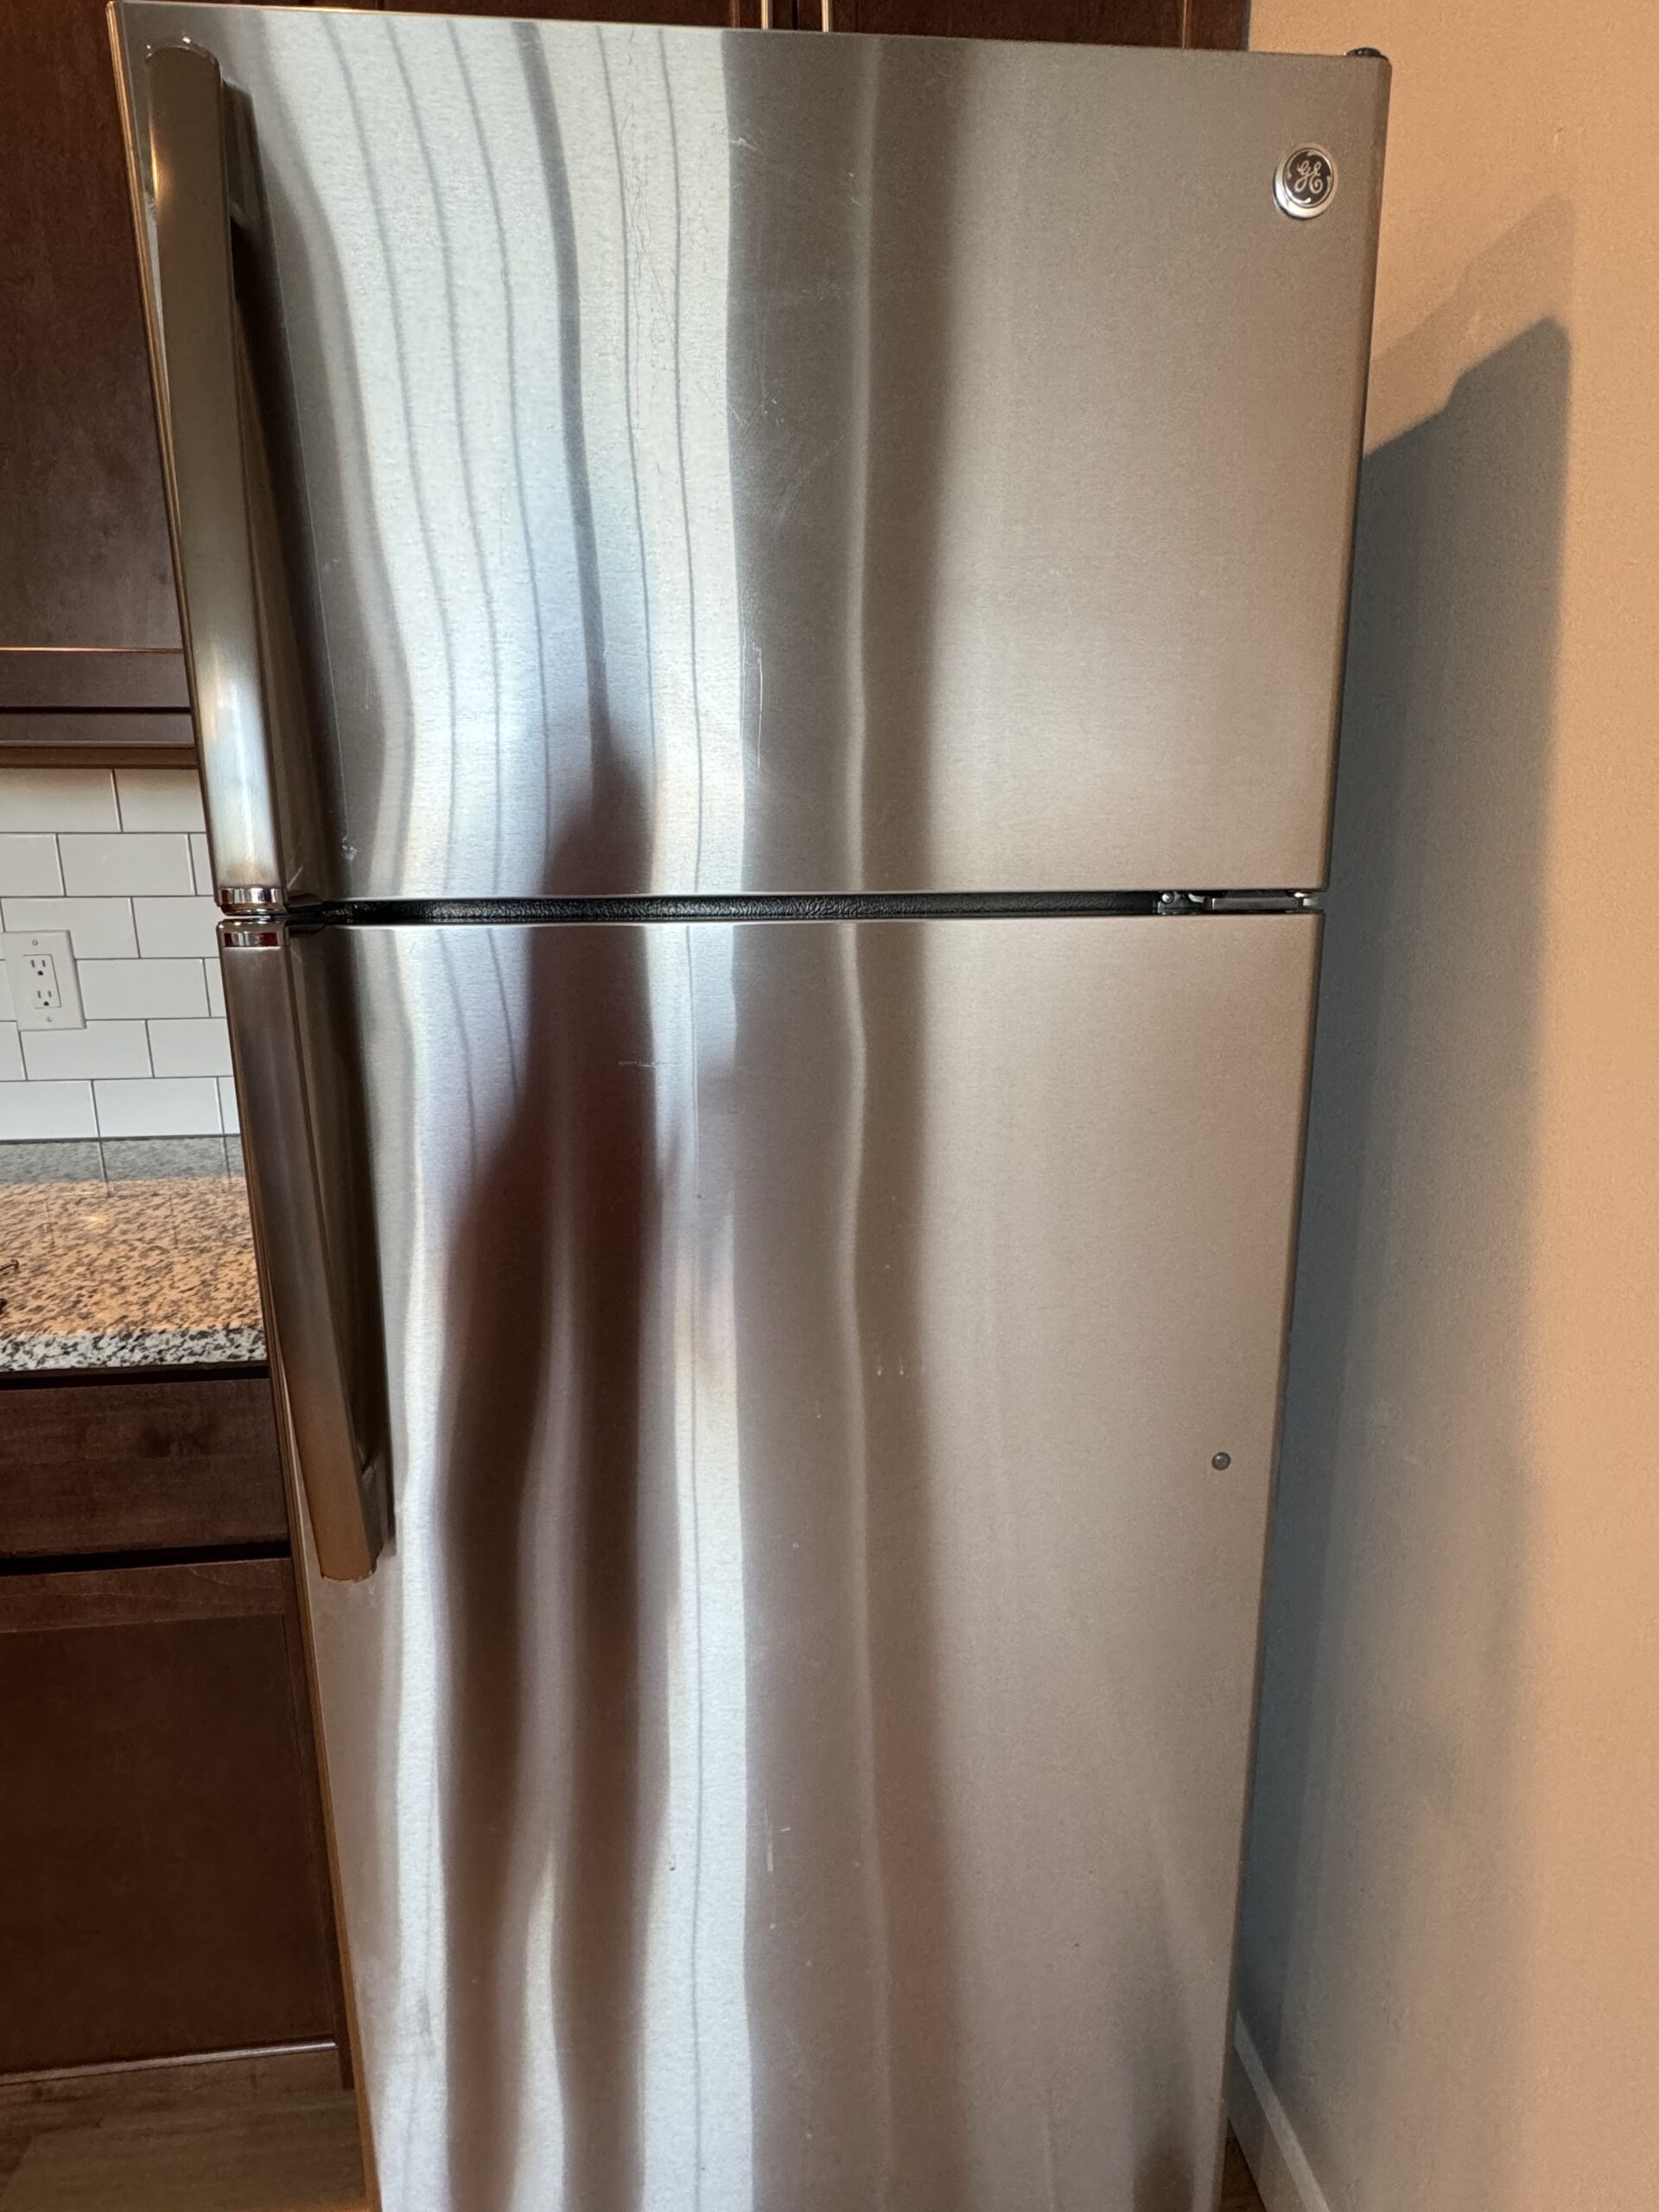 A stainless steel fridge with visible streaks and smudges before cleaning by American Maids & Floor Cleaning Specialist.